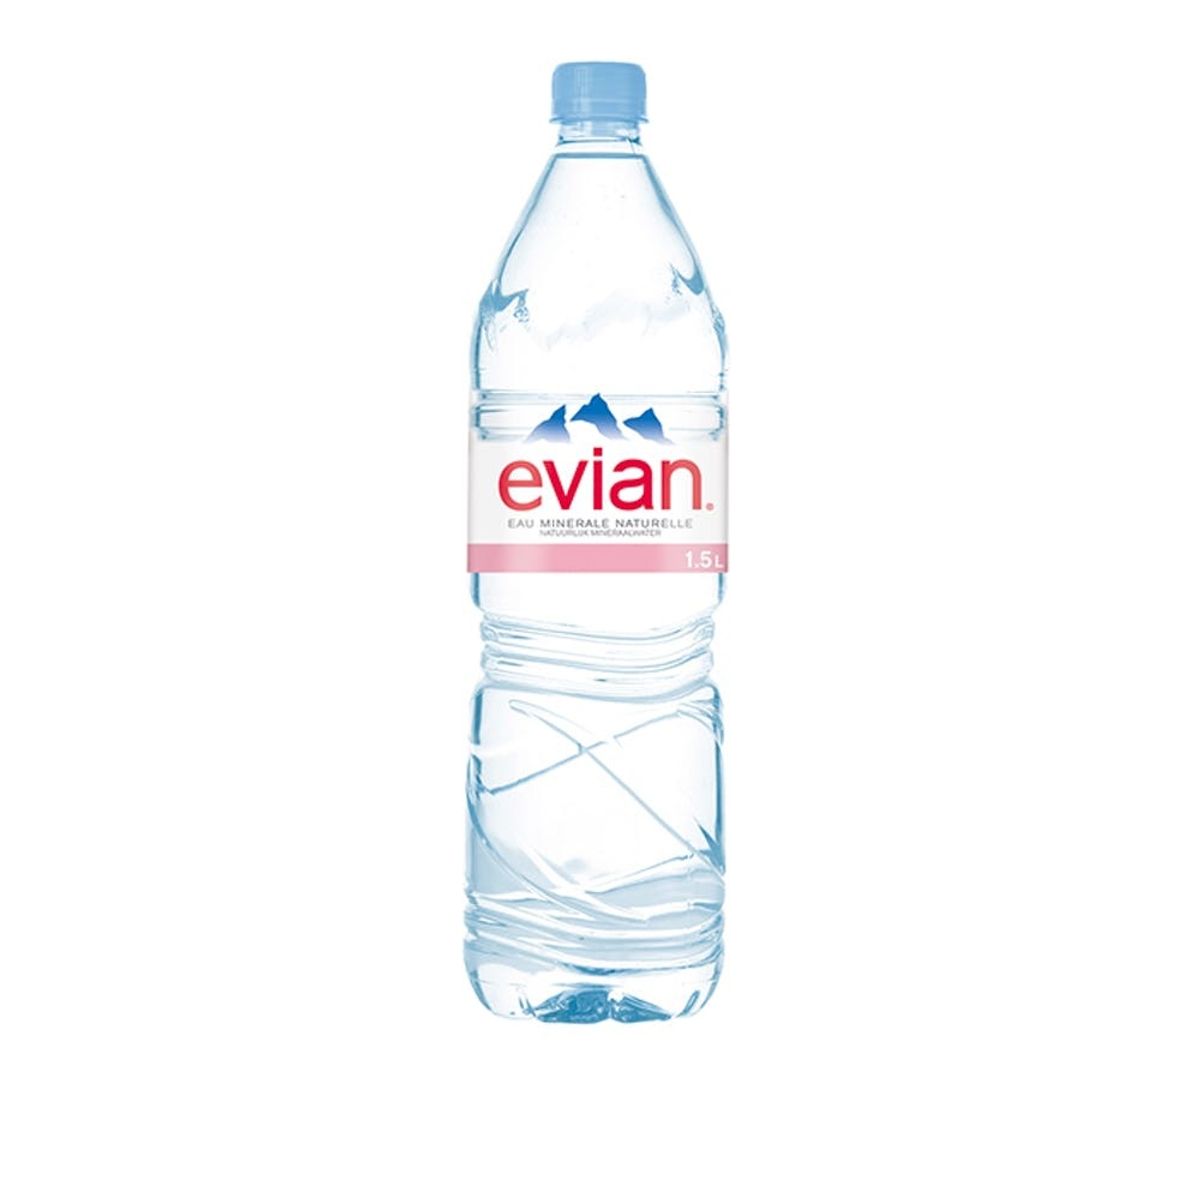 People in Japan Are DIYing Neat Phone Cases With Evian Bottles